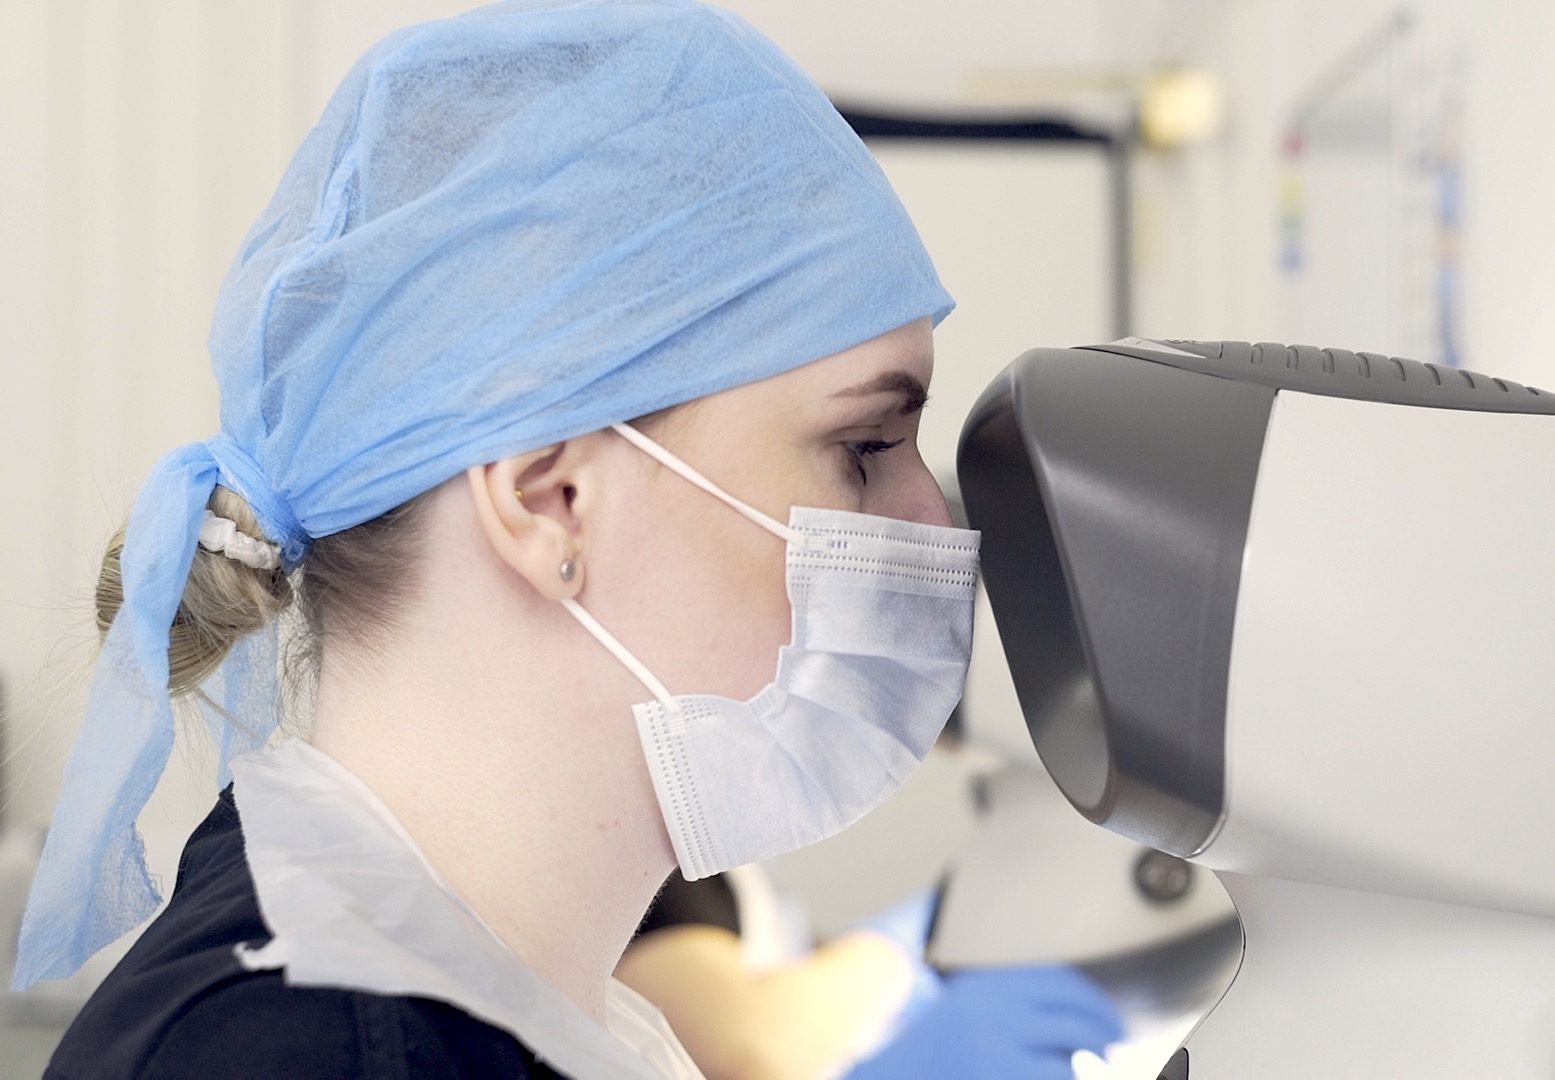 A female medical professional, wearing a surgical cap and mask, intently looks into a large diagnostic machine in a bright clinical setting, specializing in female hair loss.